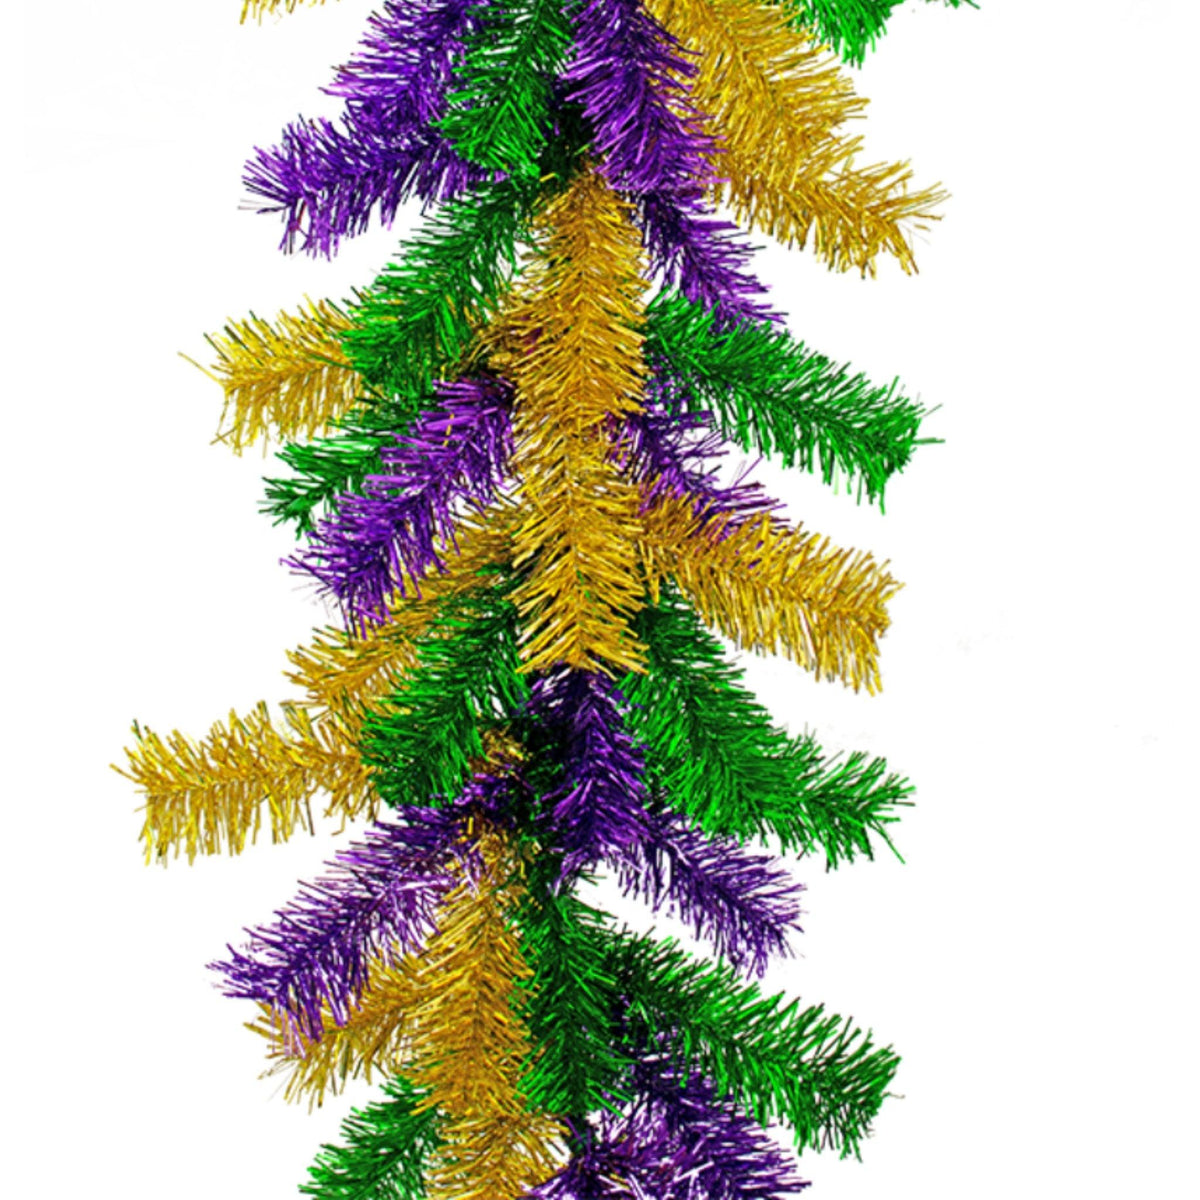 Shop now for Lee Display's brand new 6FT Mardi Gras themed mix tinsel brush garlands on sale at leedisplay.com.